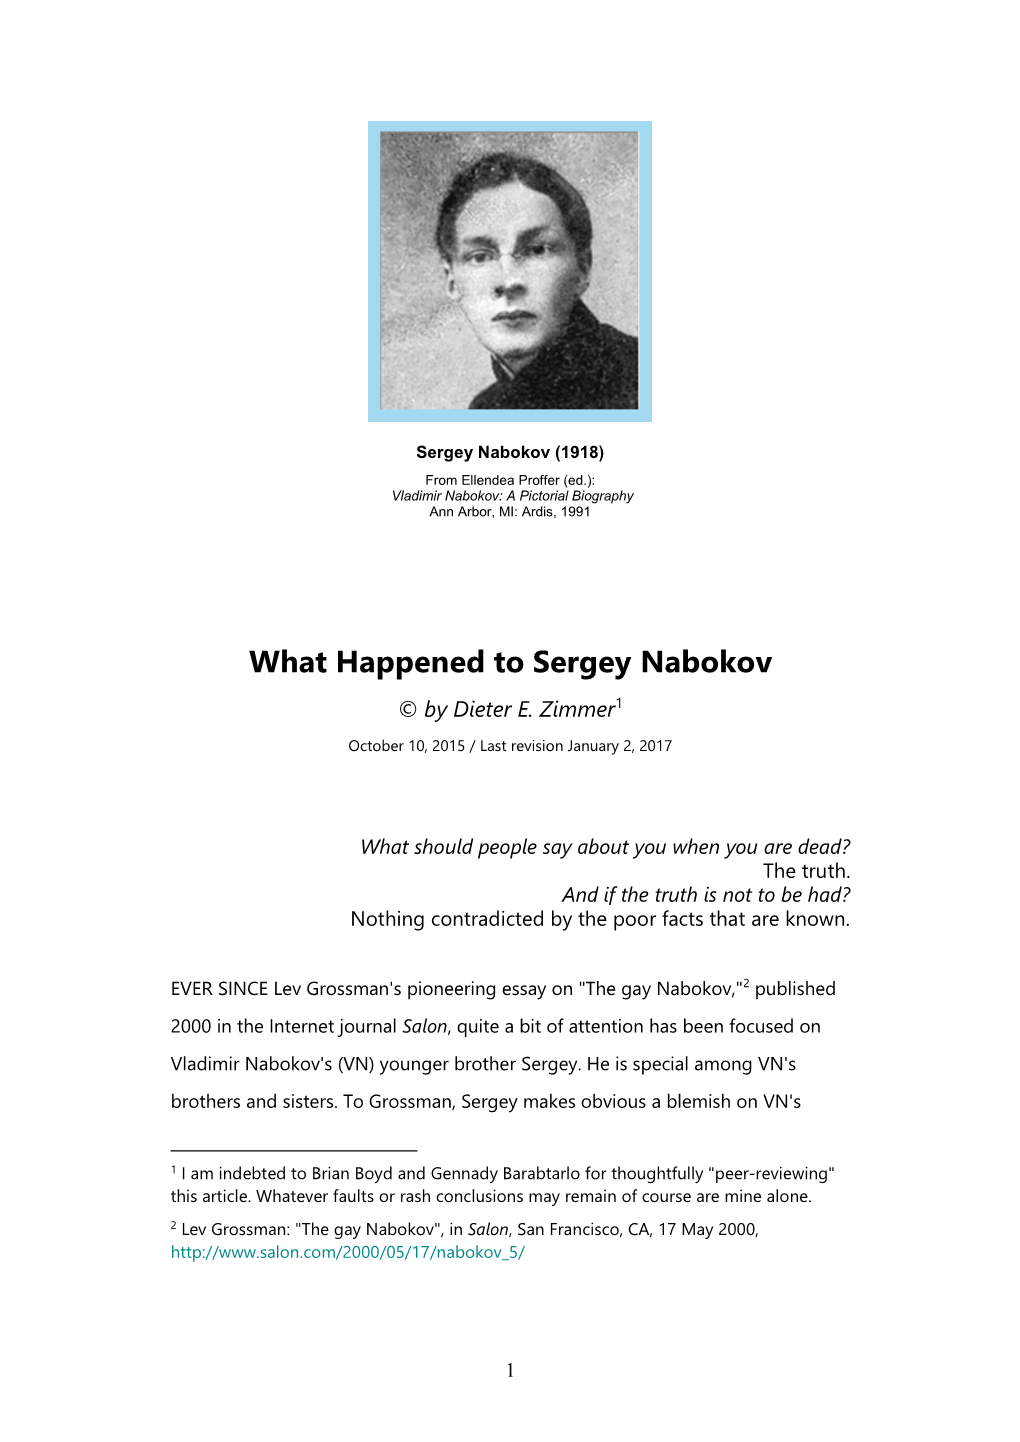 What Happened to Sergey Nabokov © by Dieter E